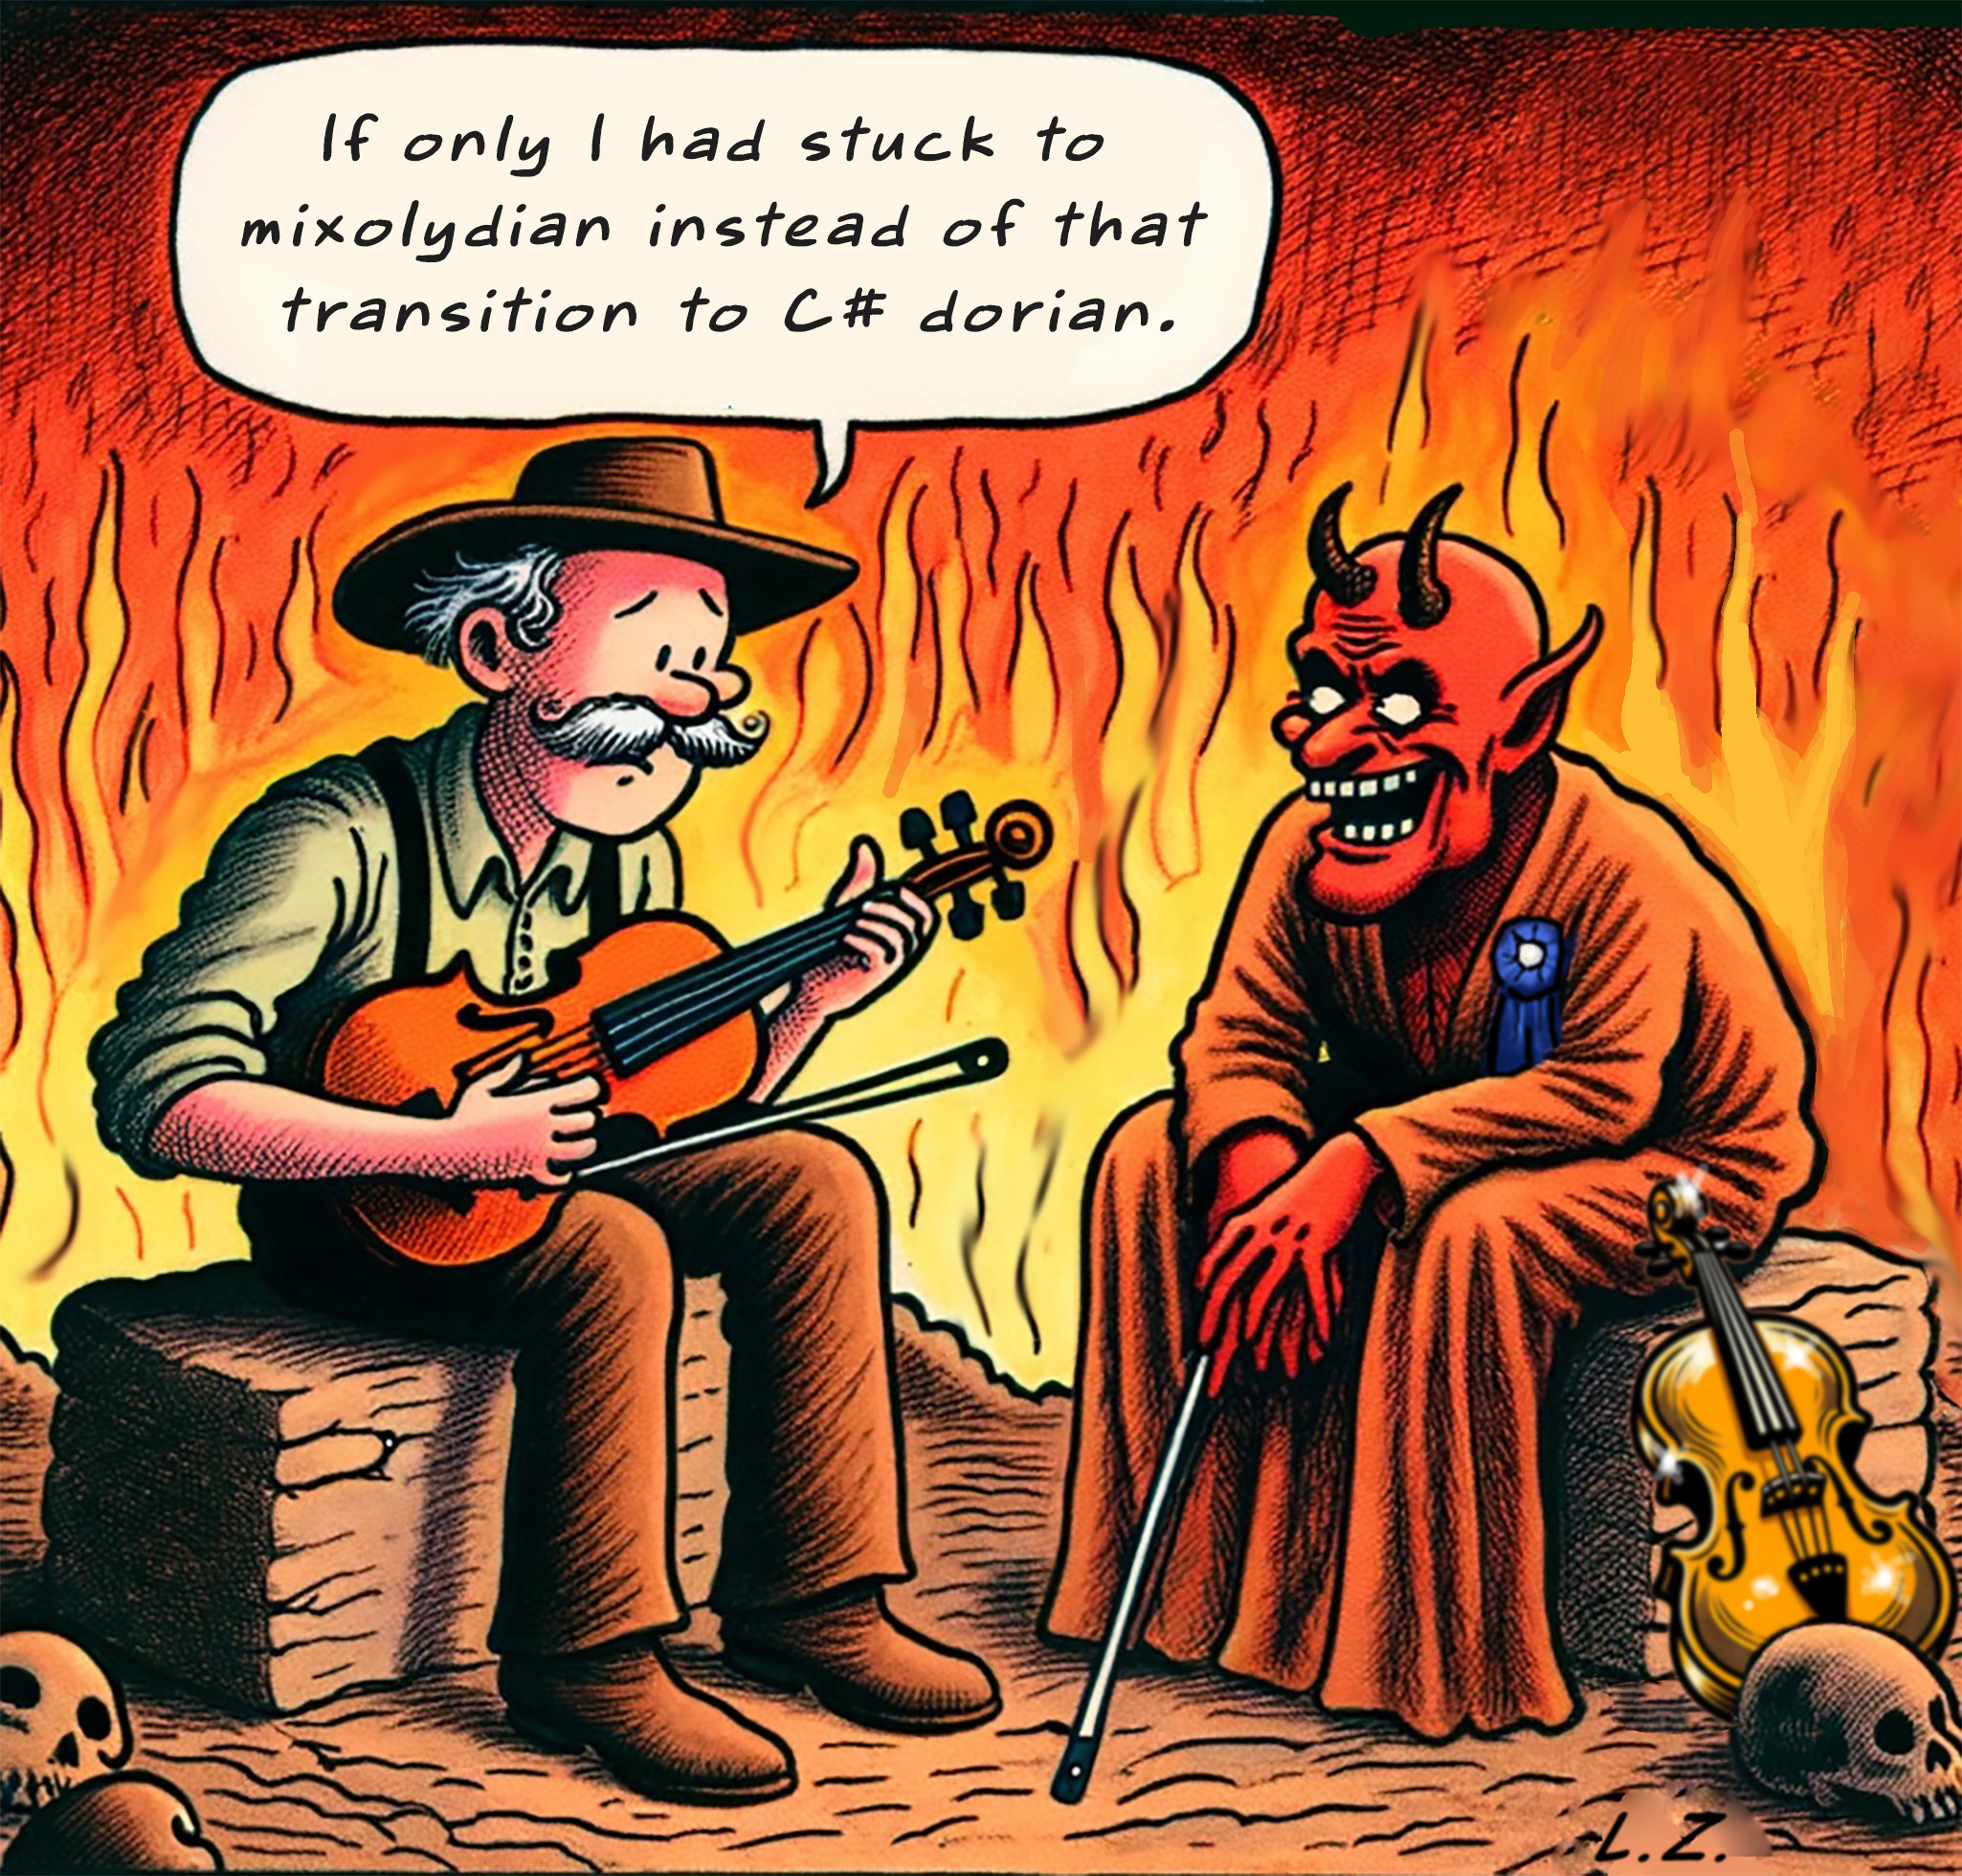 A cartoon of a fiddler and the devil in a fiery setting, with a speech bubble from the fiddler about musical scales.